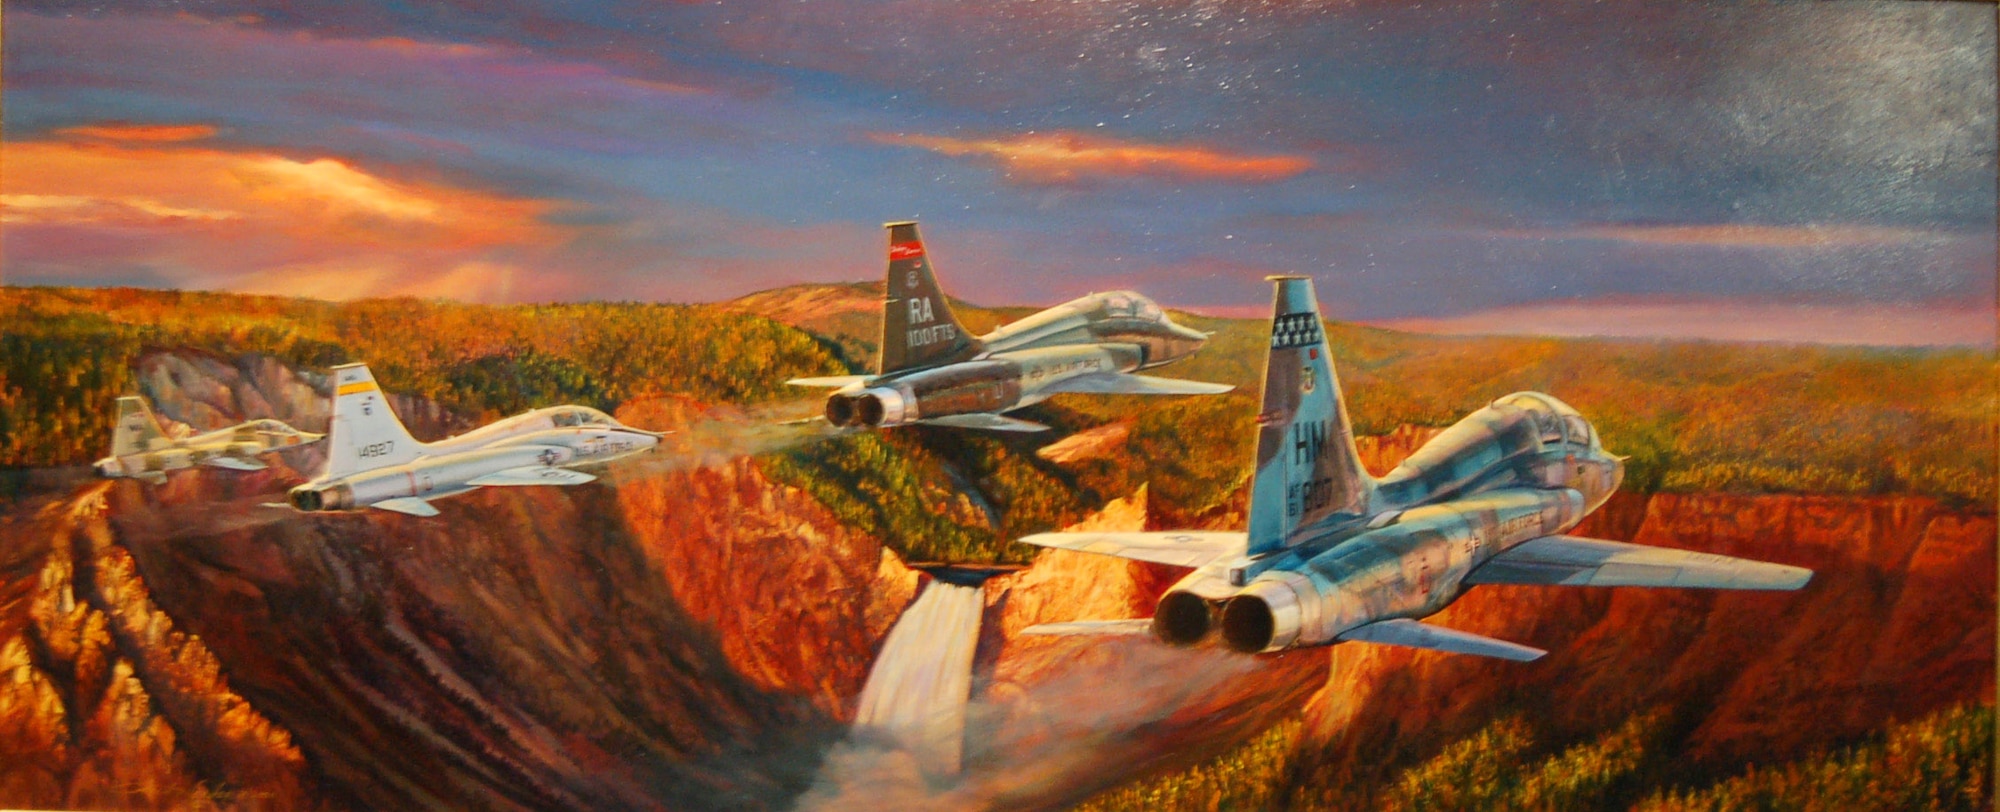 "Tails of a Pilot Maker" depicts a T-38 Talon. The T-38 is the Air Force's only supersonic trainer aircraft and on display at the University of Texas at San Antonio's Institute of Texan Cultures. (Air Force Art Program painting/Rick Herter)